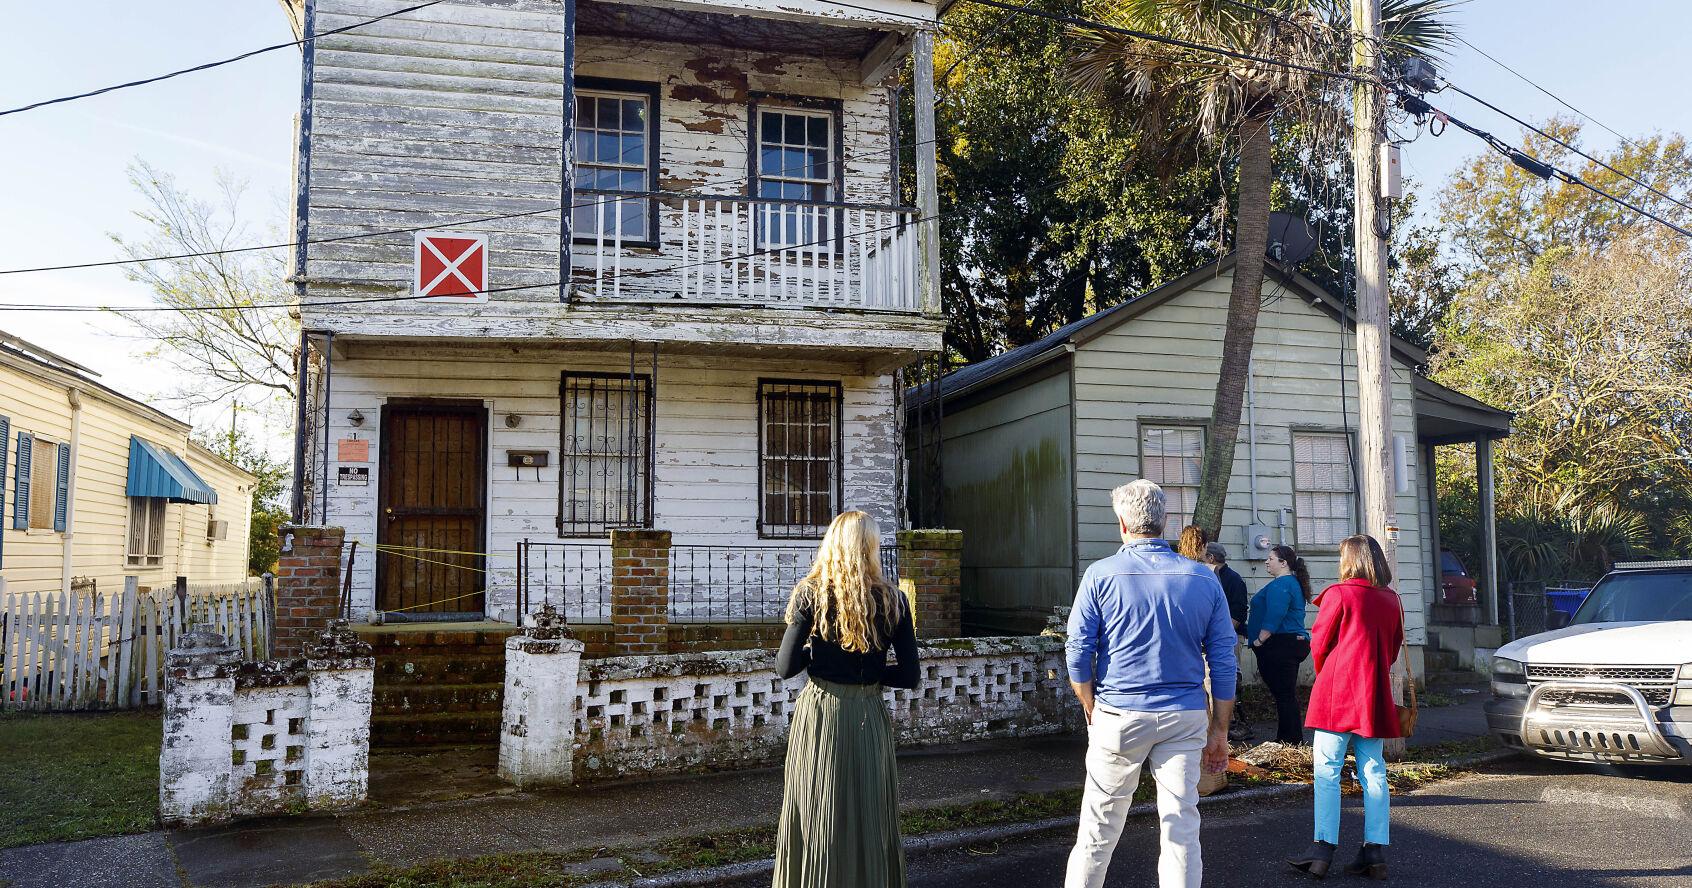 A longtime Charleston homeowner wants to tear down his home and build affordable housing but Architectural Board gets the final say